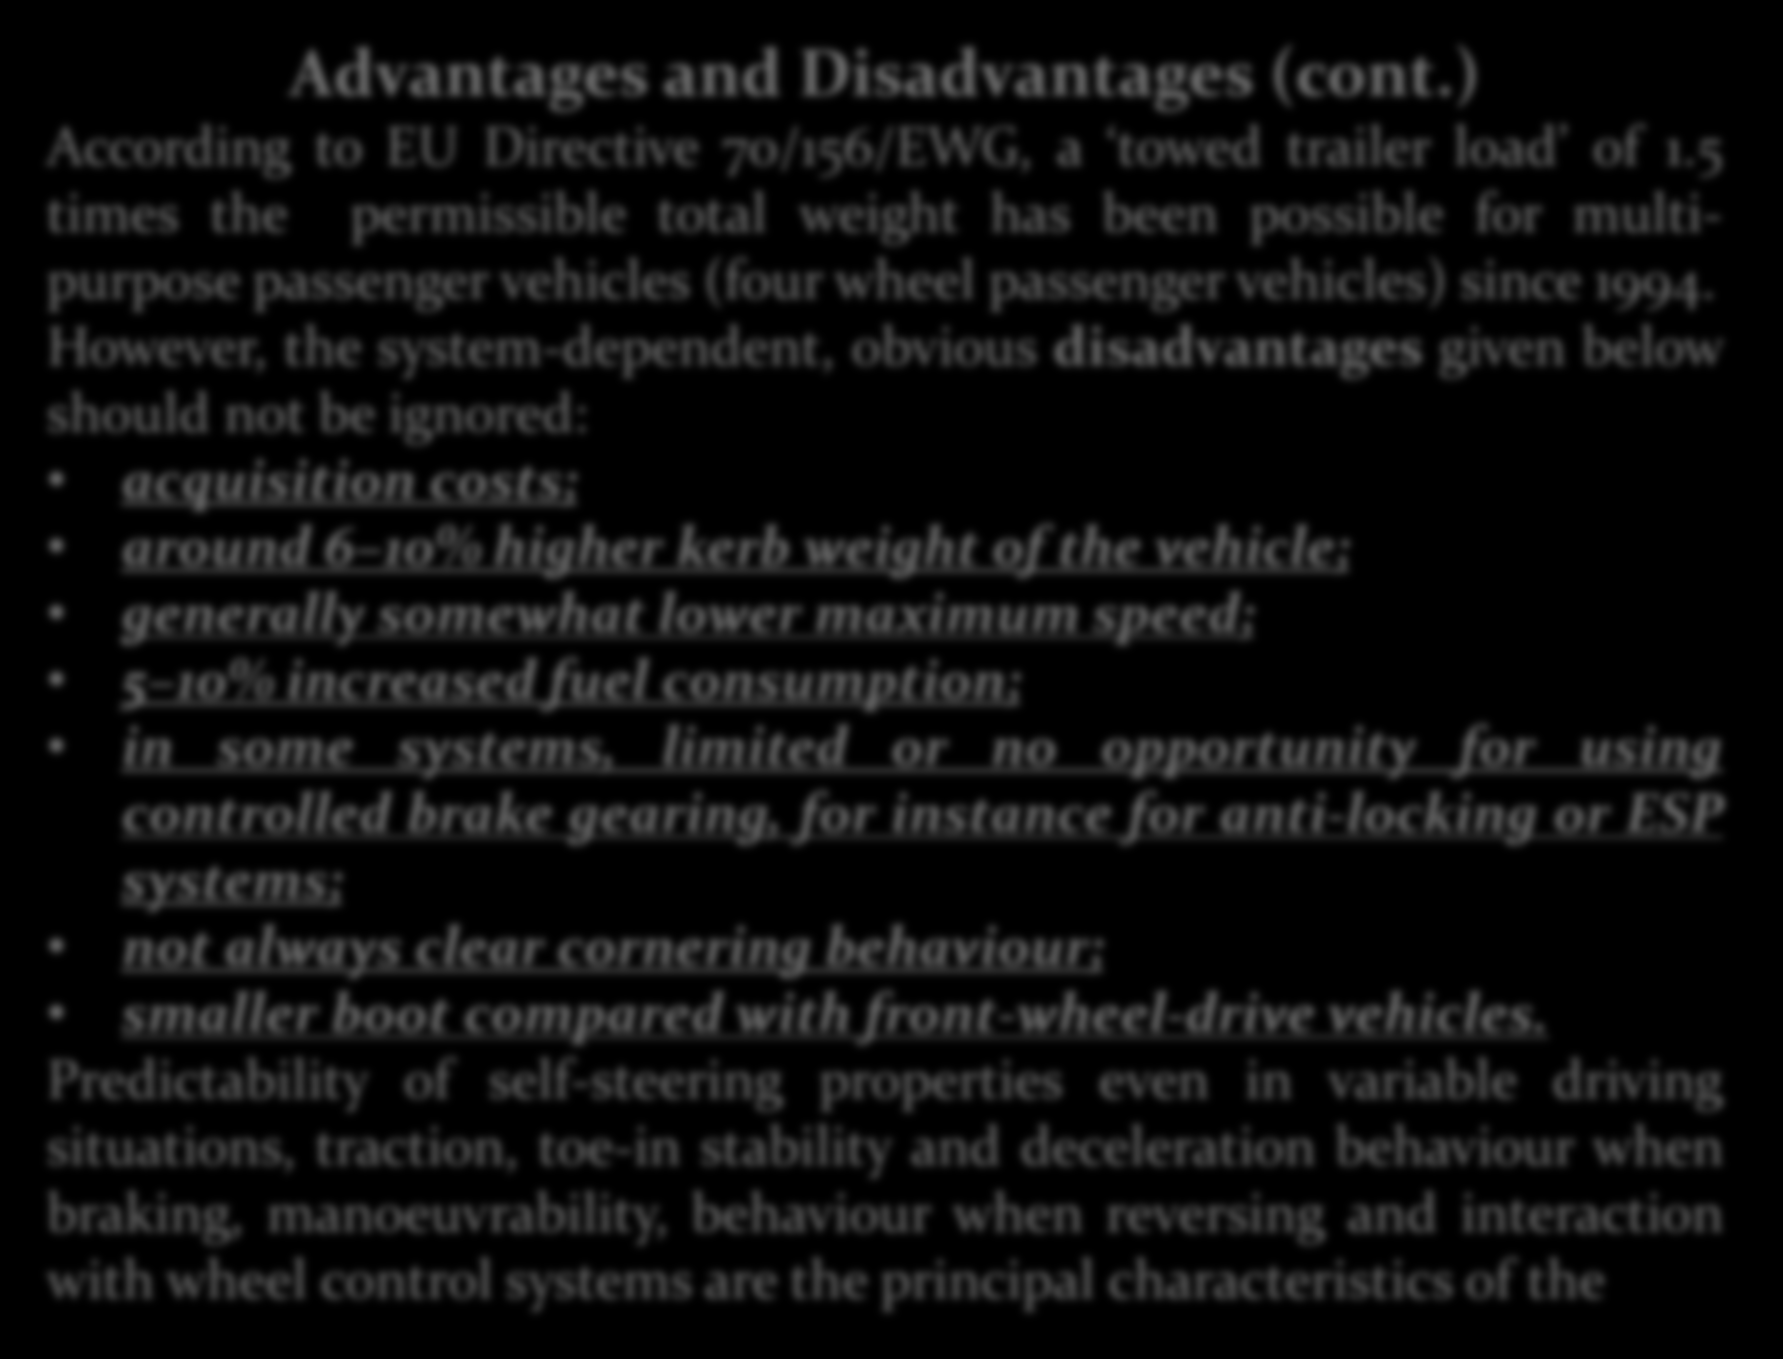 Automotive Engineering, 2009 Advantages and Disadvantages (cont.) According to EU Directive 70/156/EWG, a towed trailer load of 1.